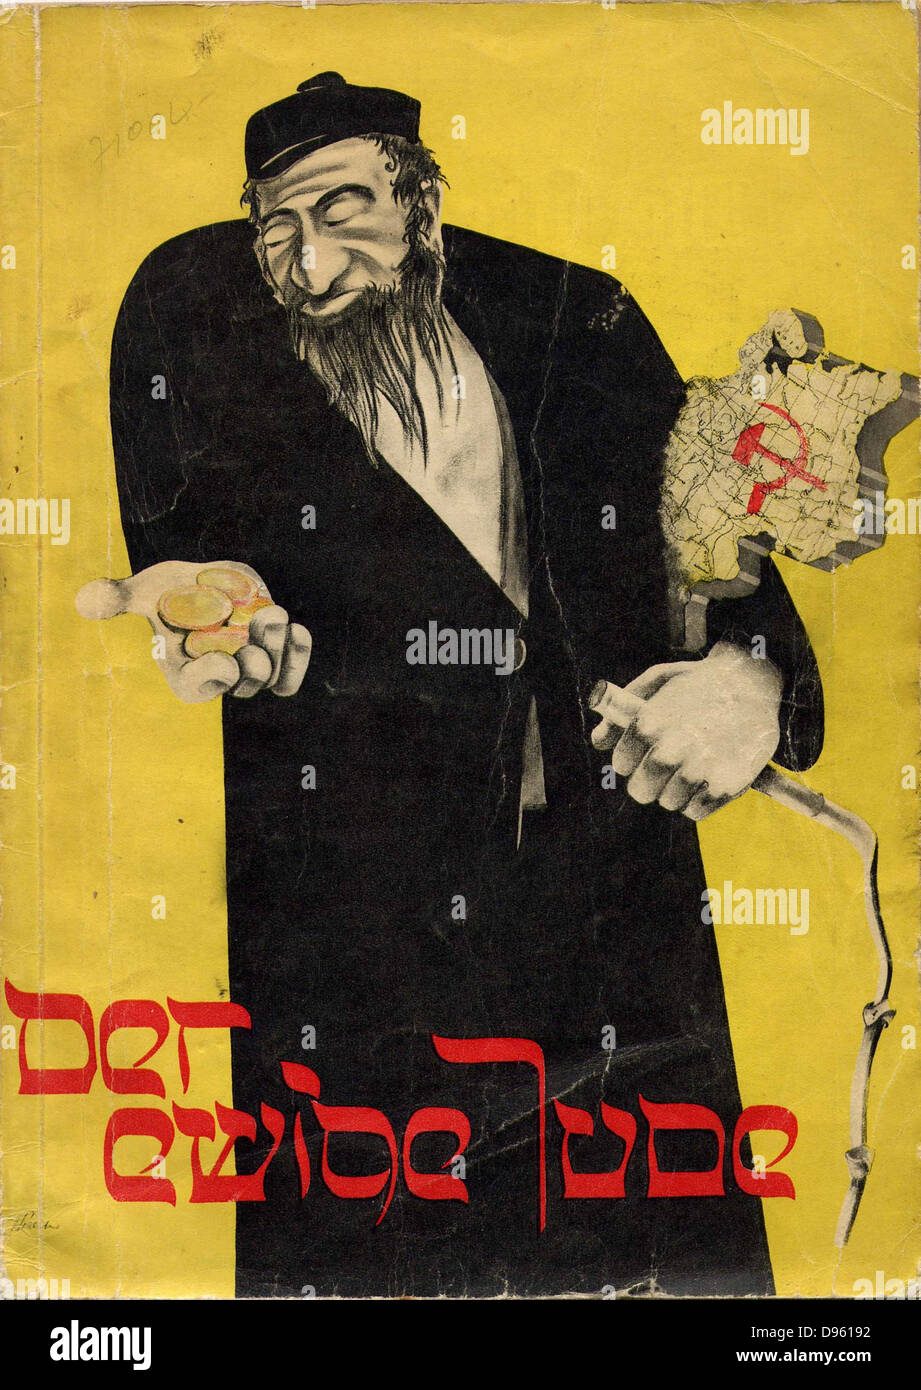 DER EWIGE JUDE, 1937, book of phtographs published by the Third Reich. Dramatic Antisemitic illustration on the cover showing Stock Photo